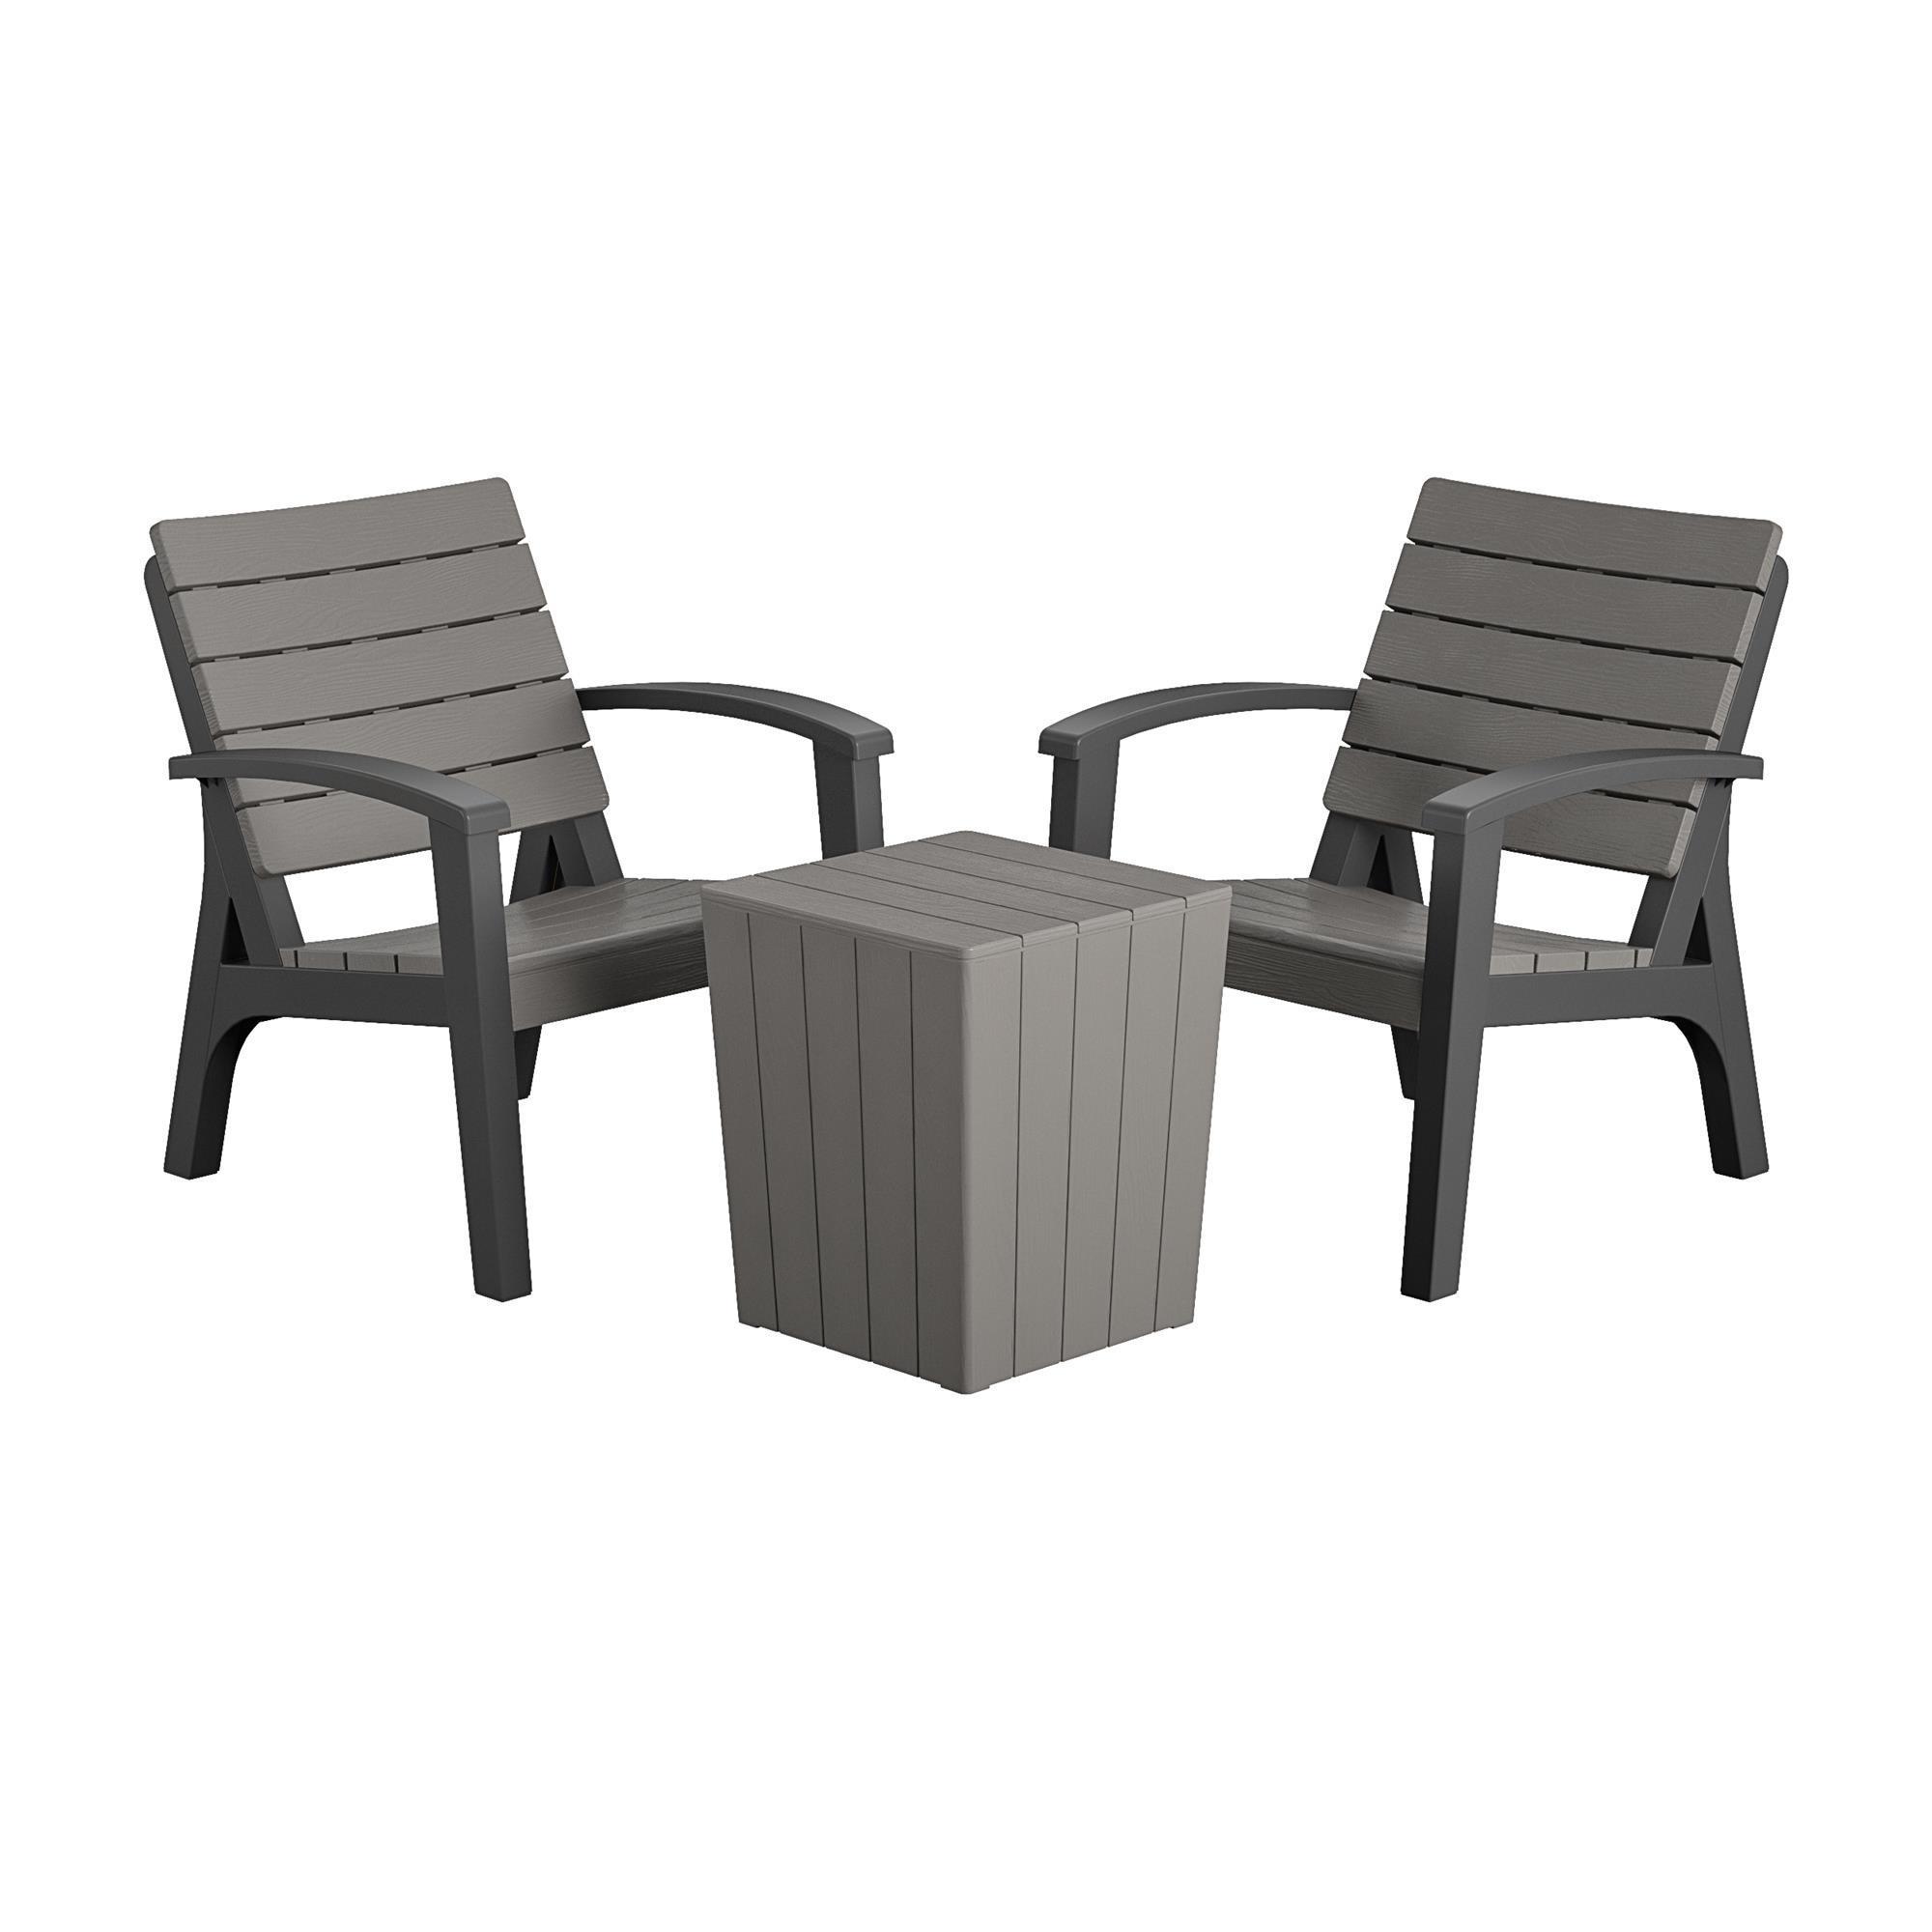 Cosco, 3-Piece Resin Chat Set: Weather-resistant., Included (qty.) 3 Model 88316WGG1E